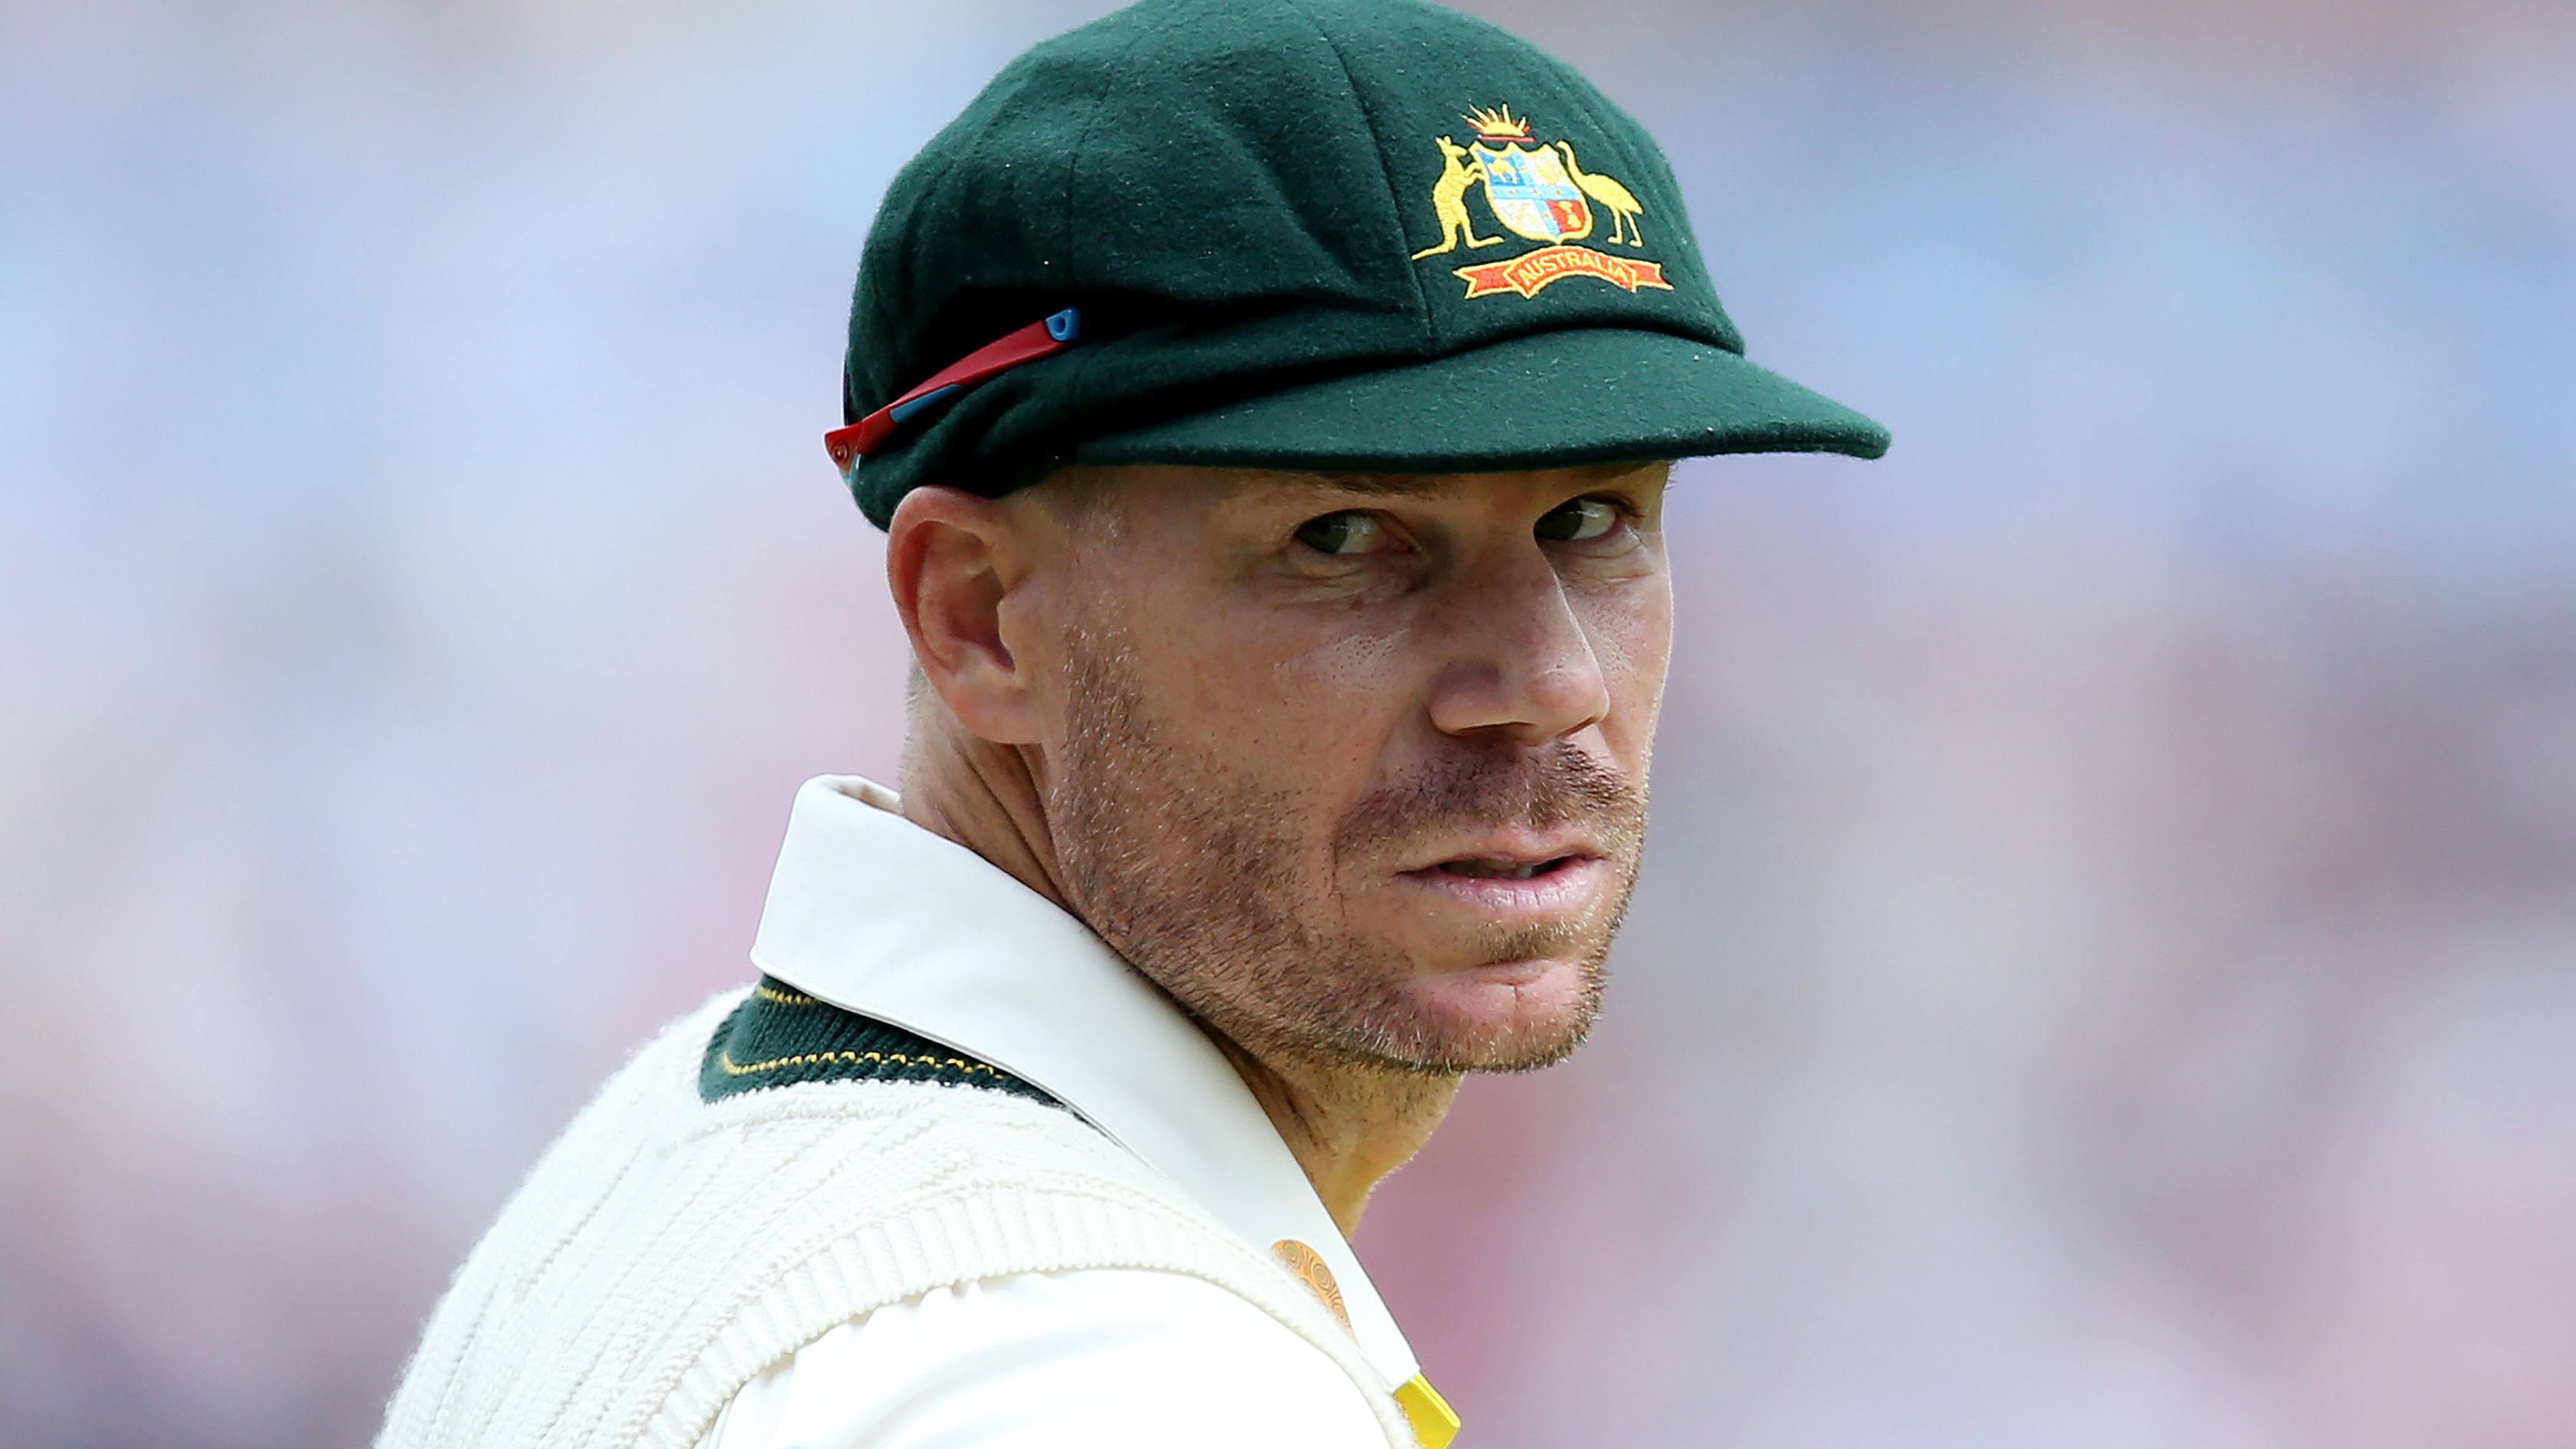 LEEDS, ENGLAND - JULY 09: David Warner of Australia during Day Four of the LV= Insurance Ashes 3rd Test Match between England and Australia at Headingley on July 09, 2023 in Leeds, England. (Photo by Ashley Allen/Getty Images)